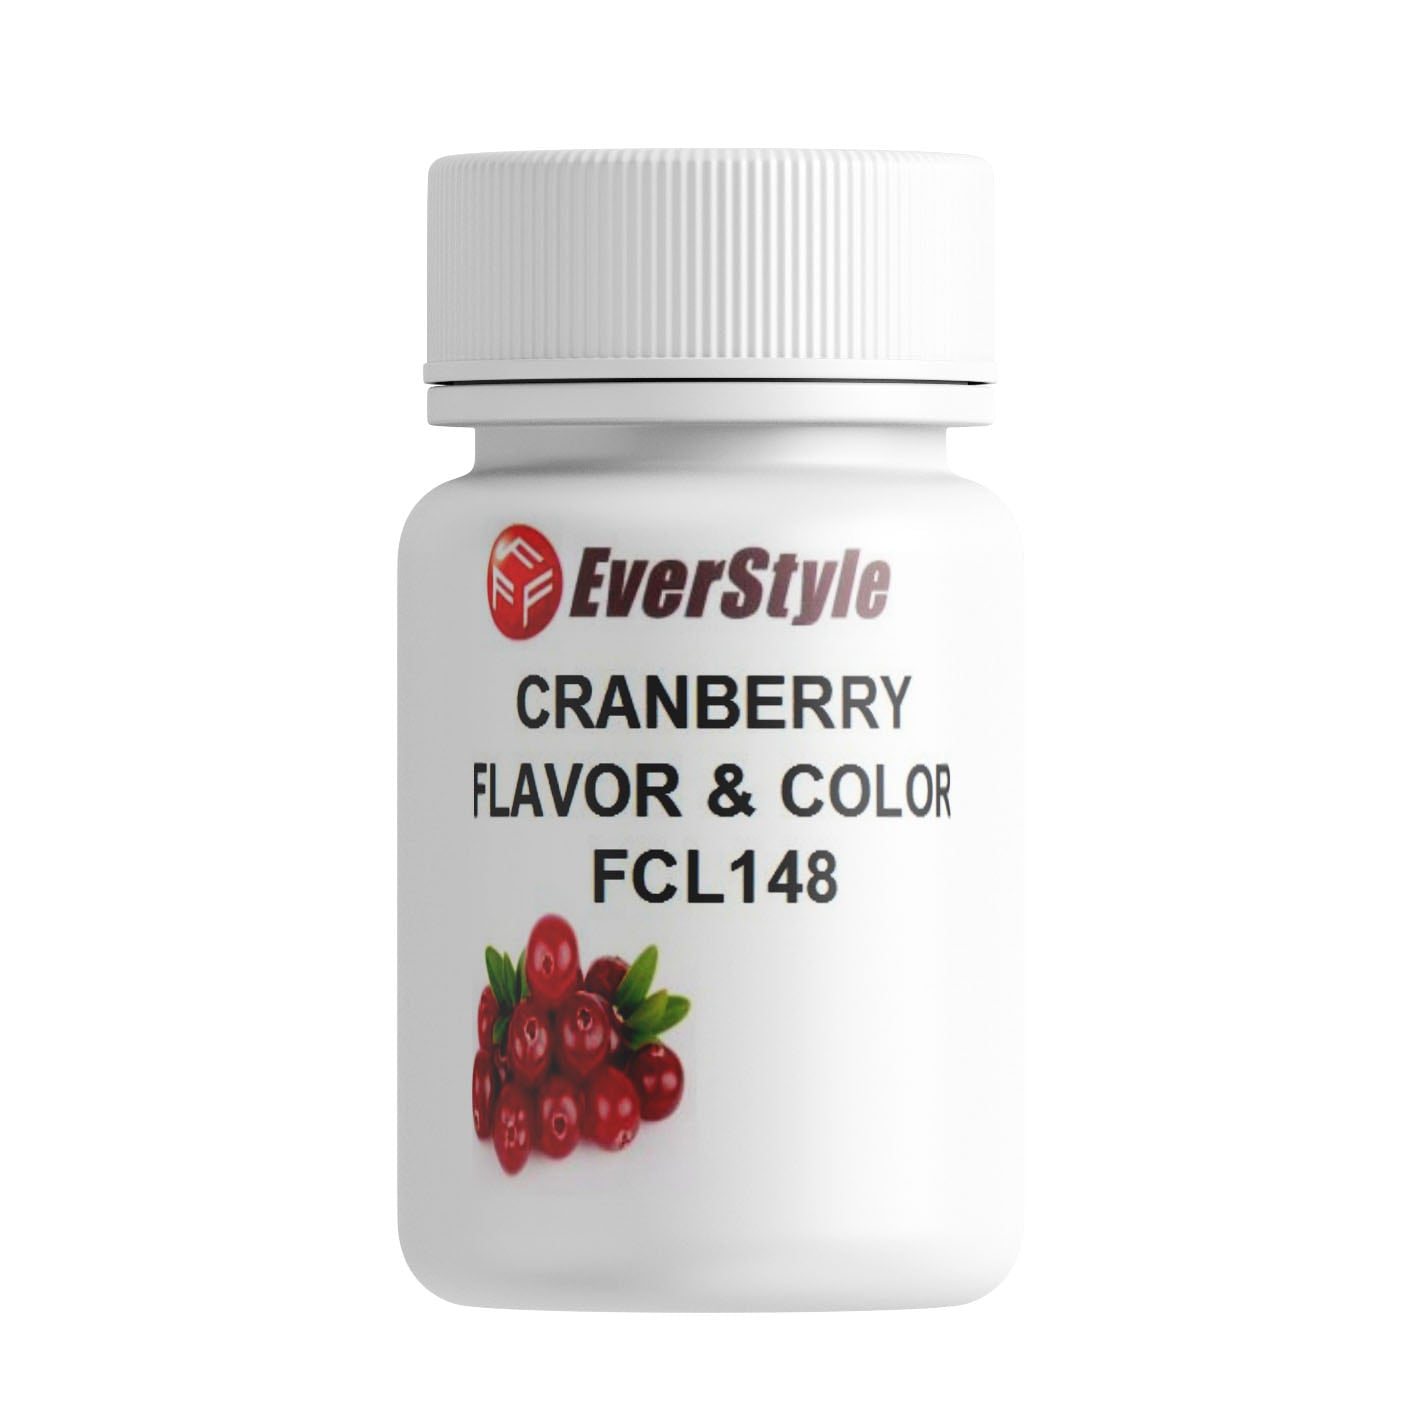 Everstyle Cranberry Flavor and Color 30g (FCL148)